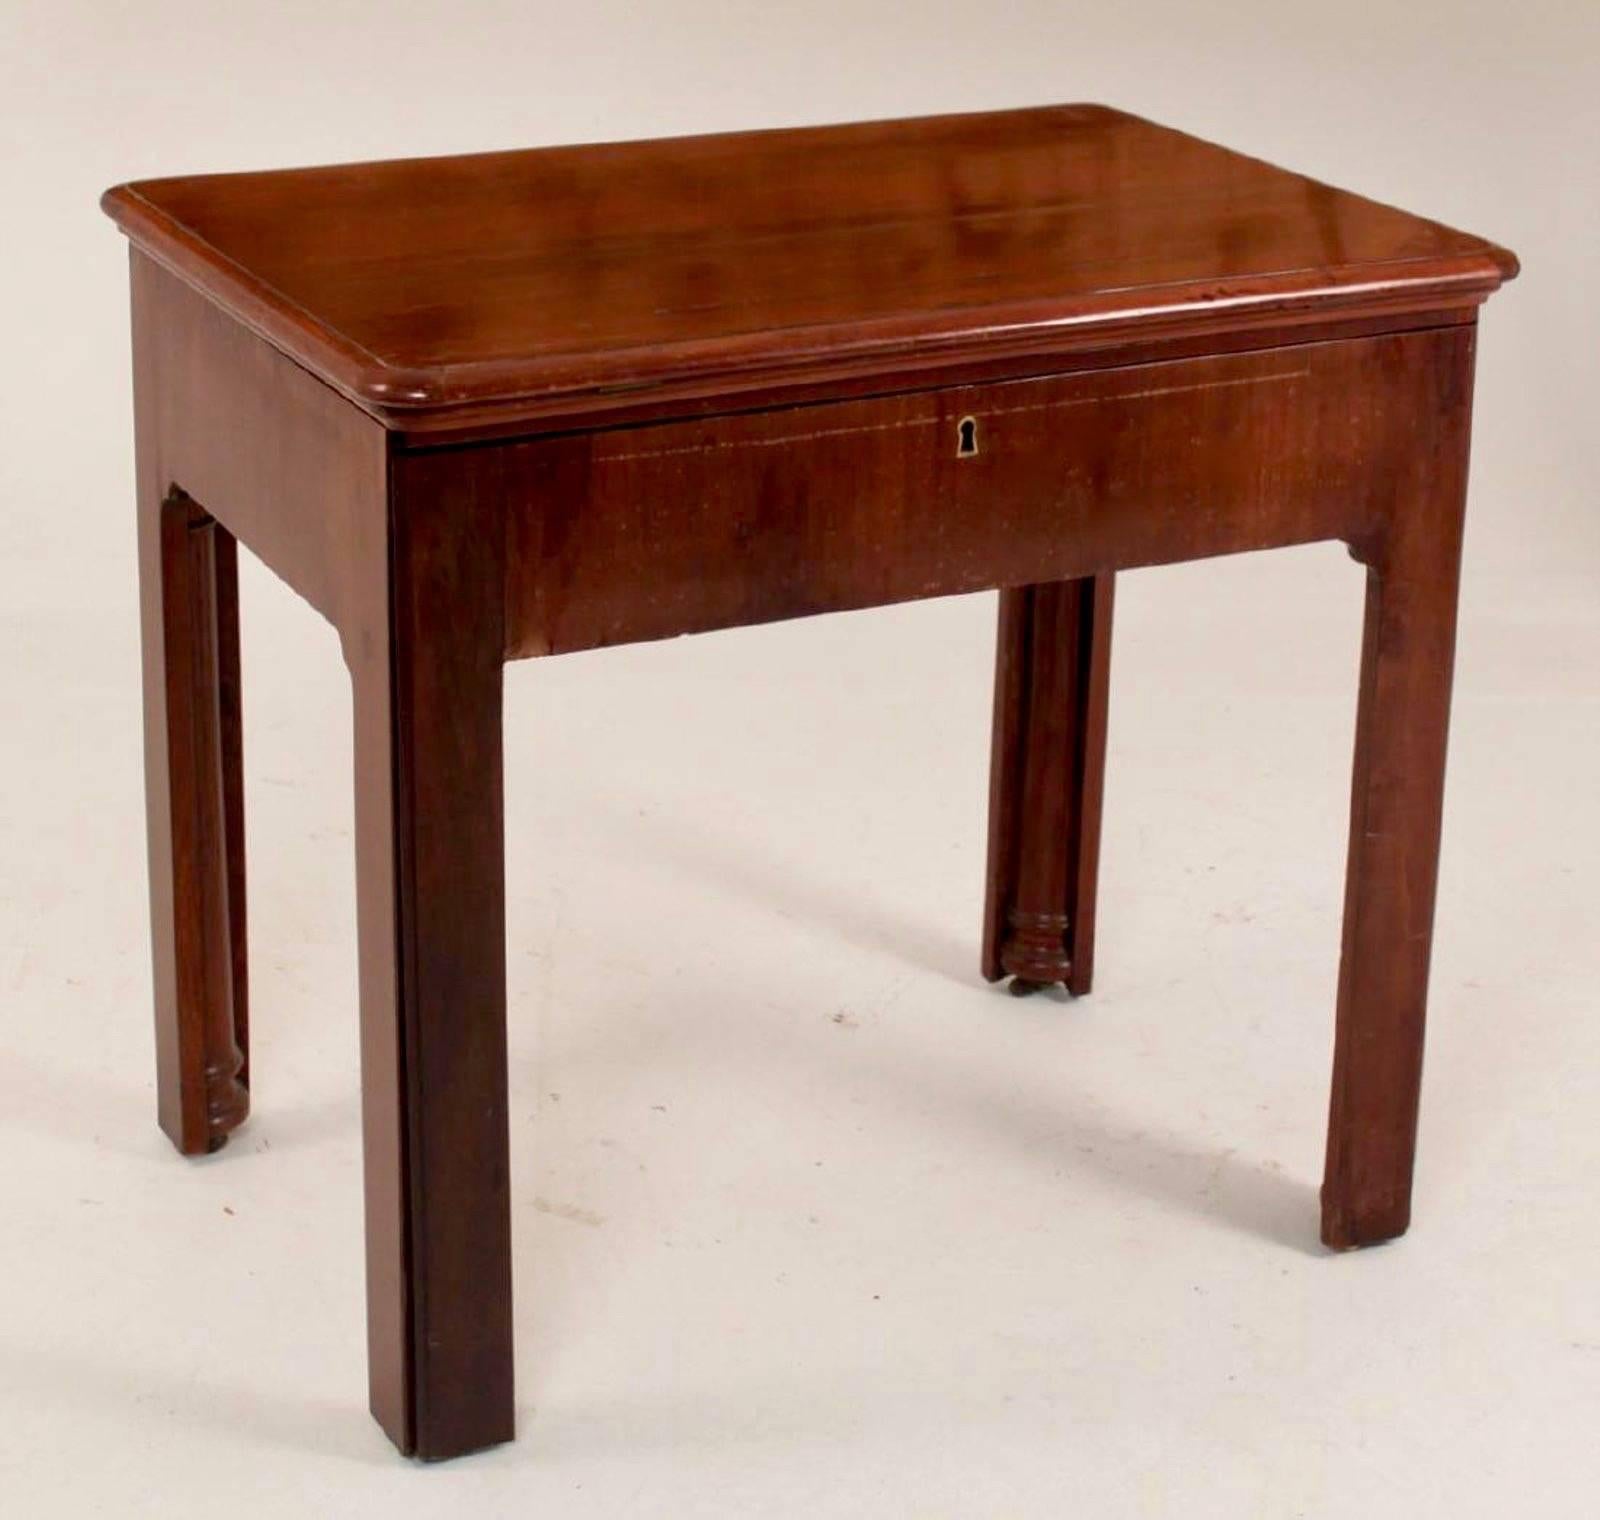 Period Georgian architect's table or desk
--Metamorphic
--Cuban mahogany
--Writing surfaces and racheted book supports
--A very well construction version.